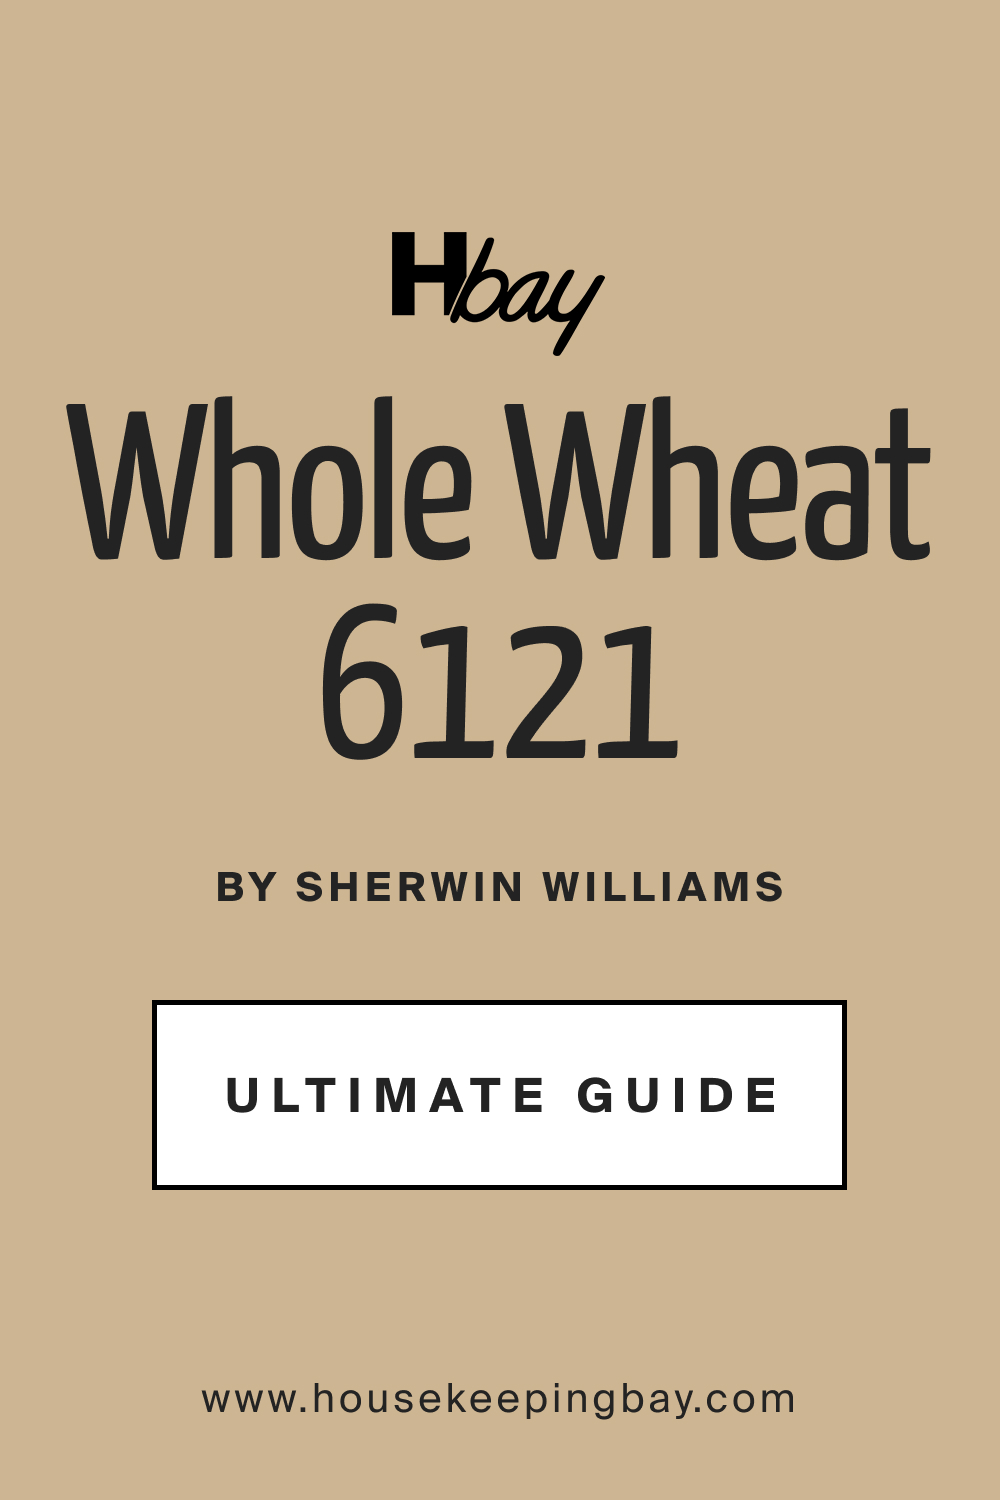 SW 6121 Whole Wheat by Sherwin Williams Ultimate Guide